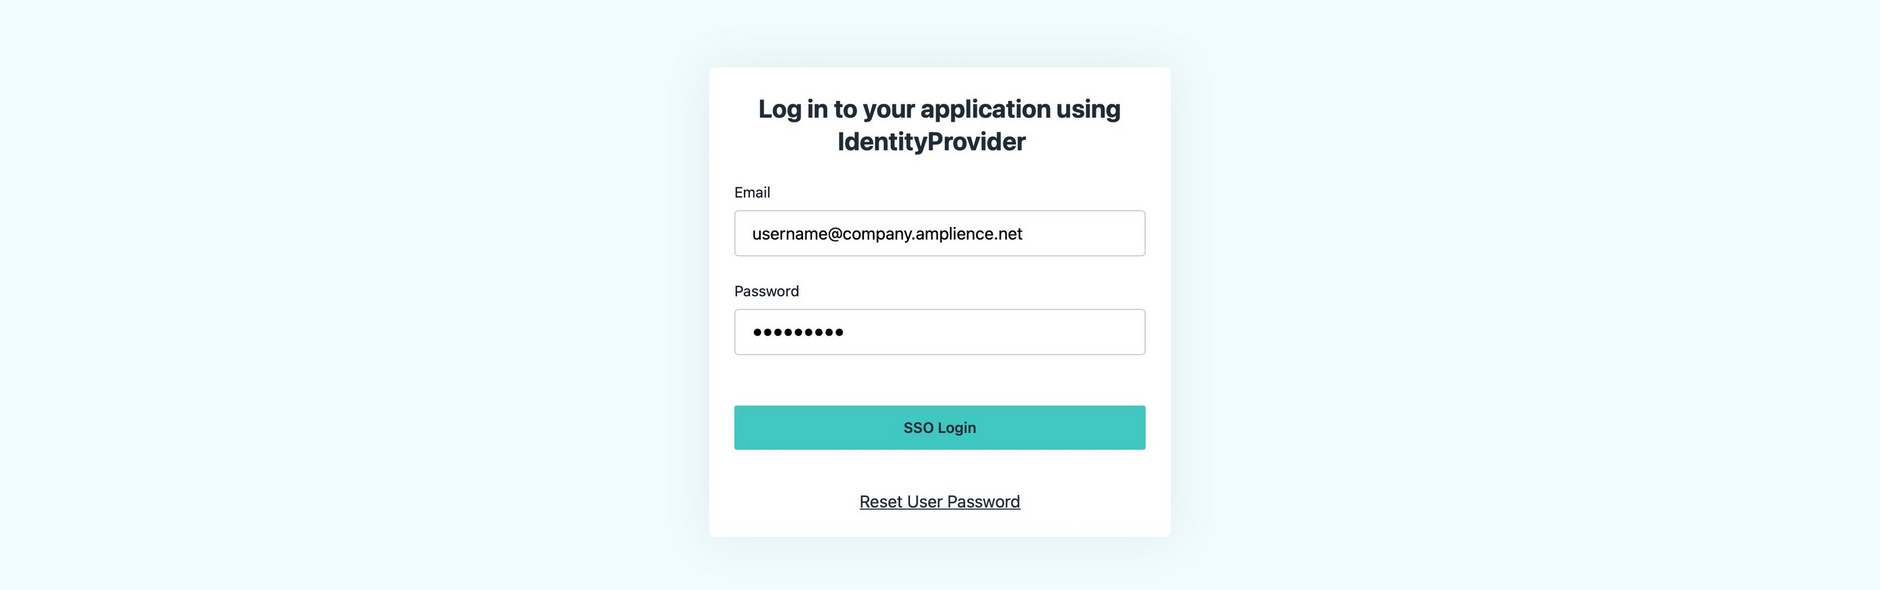 From the login page you are redirected to the login page of your identity provider.